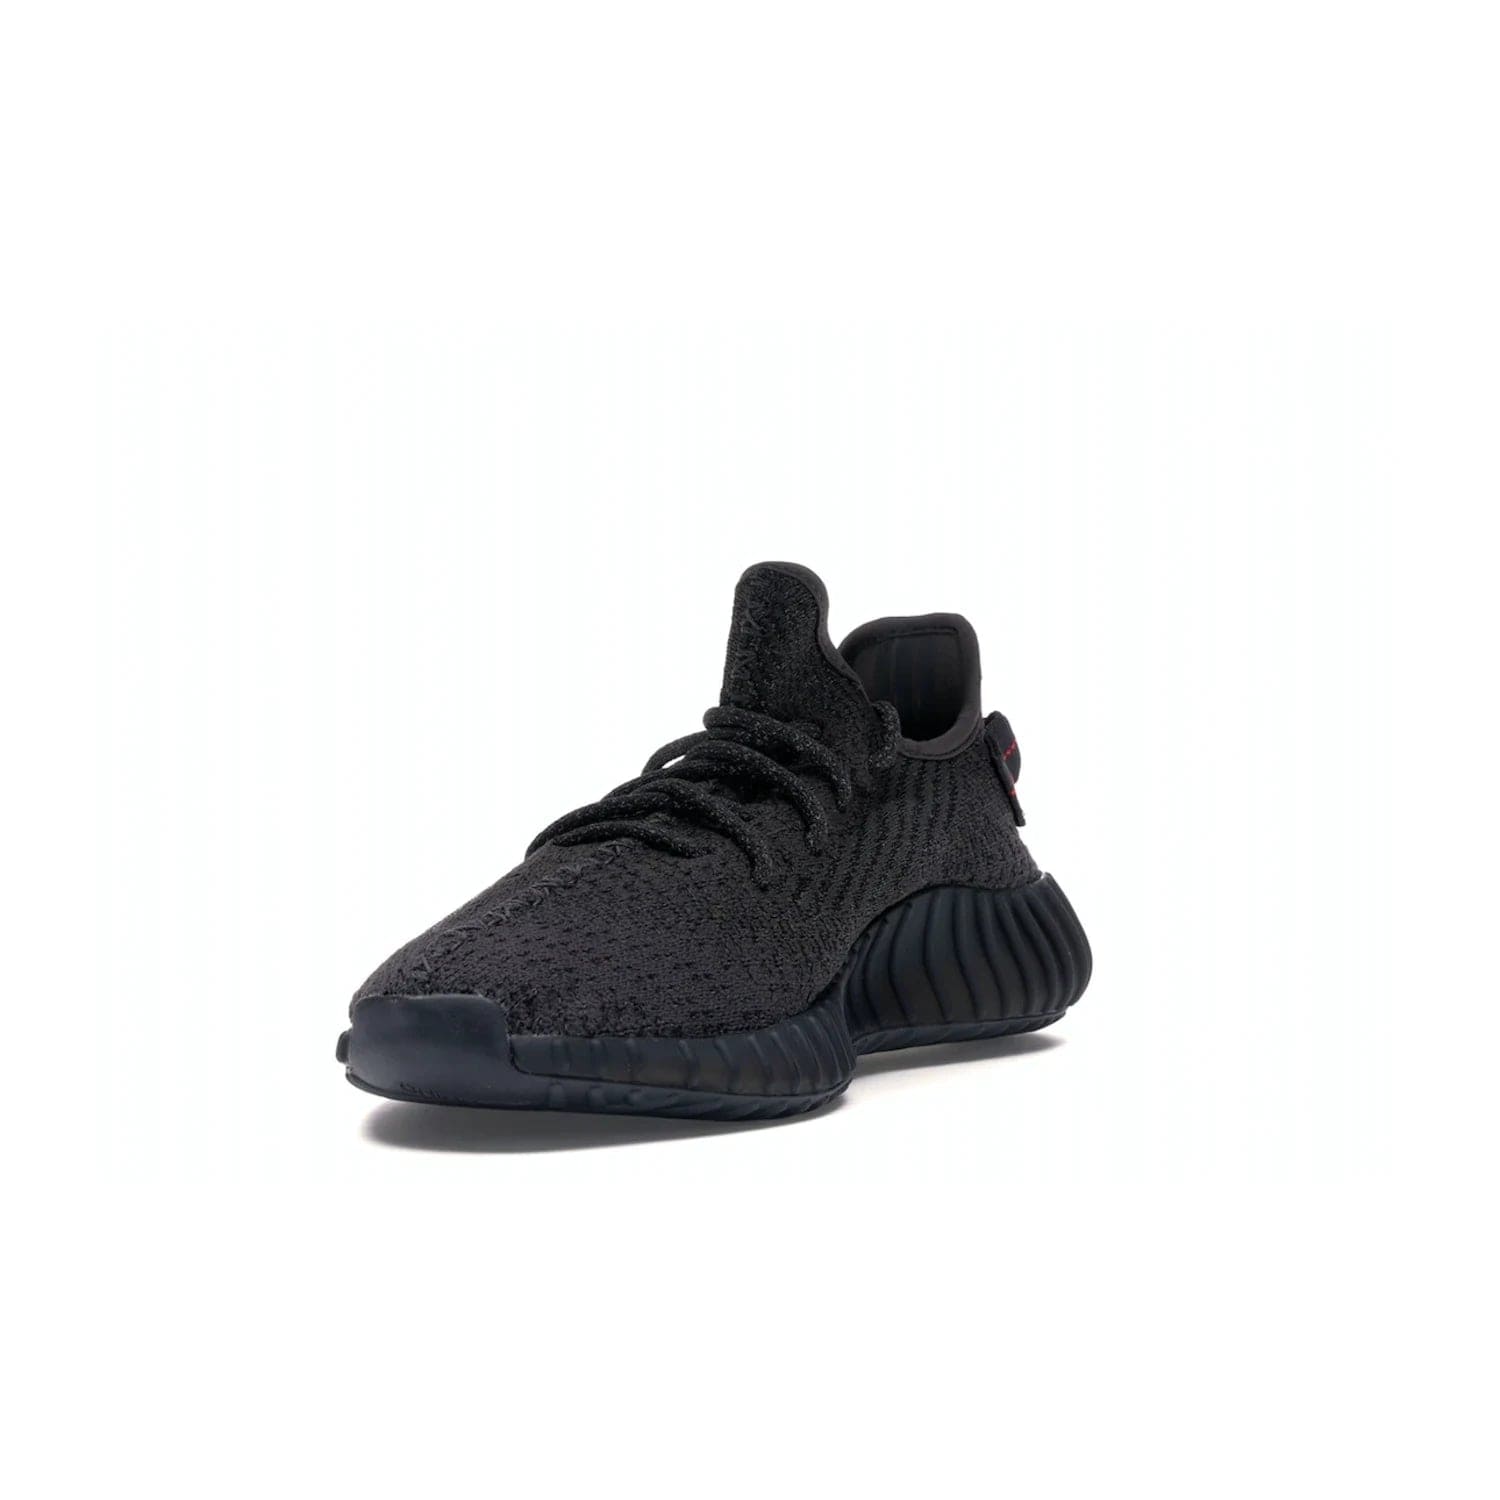 adidas Yeezy Boost 350 V2 Static Black (Reflective) - Image 13 - Only at www.BallersClubKickz.com - Make a statement with the adidas Yeezy Boost 350 V2 Static Black Reflective. All-black upper, reflective accents, midsole, and sole combine for a stylish look. High quality materials. June 2019 release. Add to your collection today.